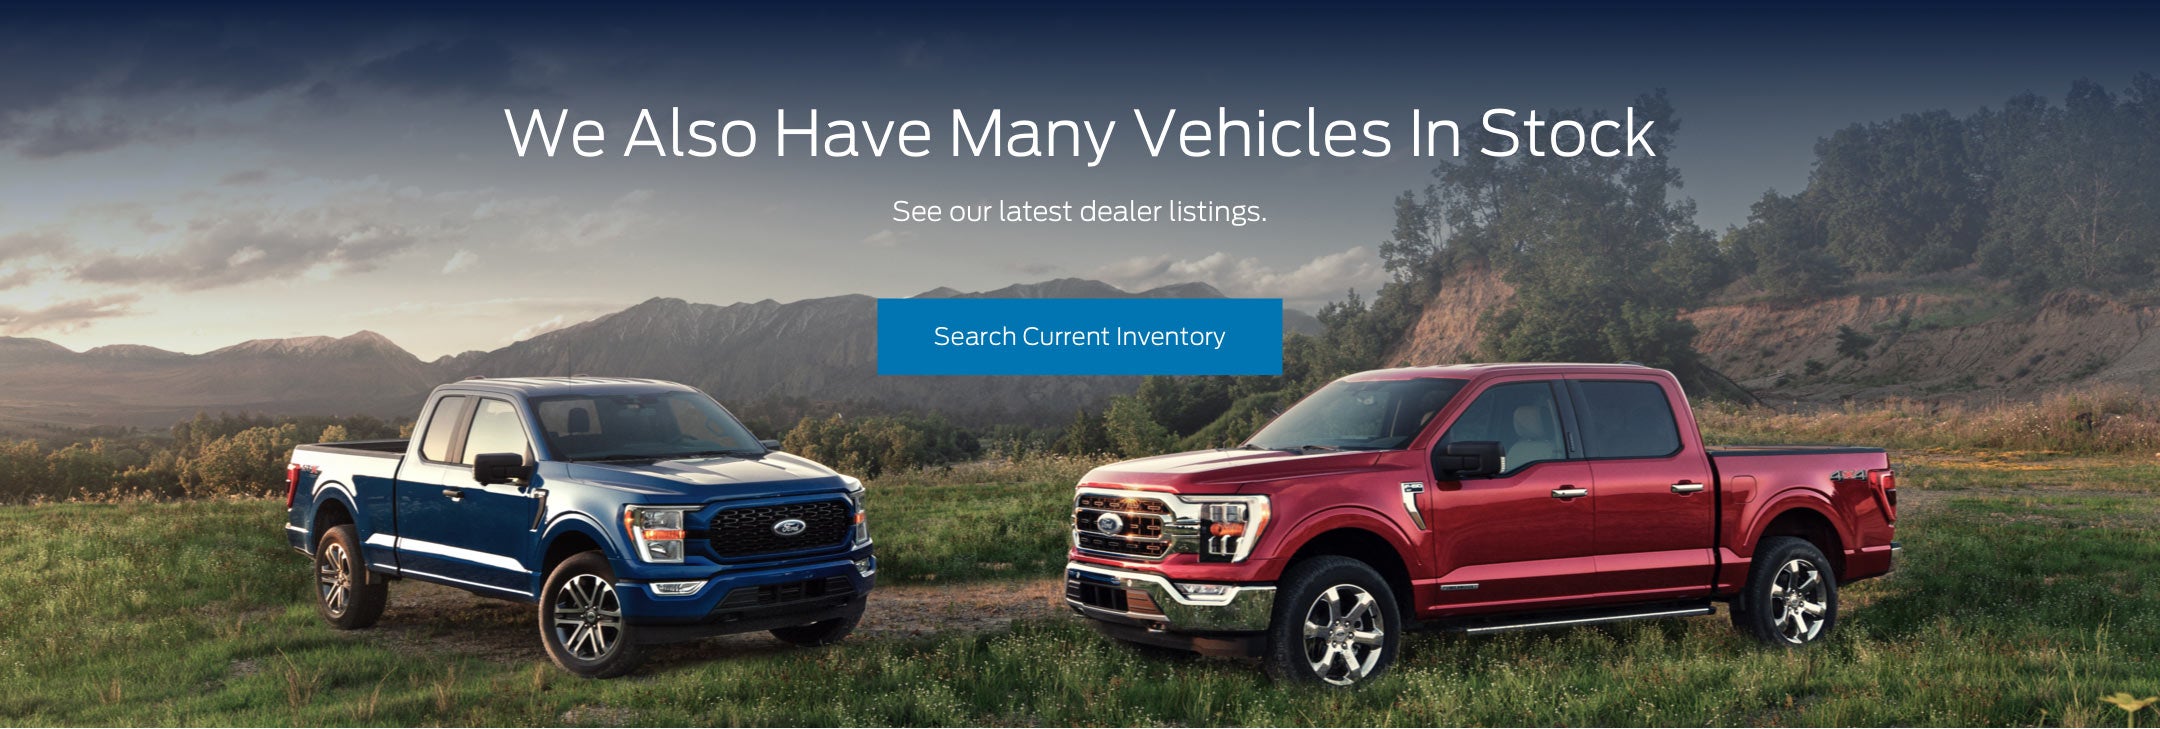 Ford vehicles in stock | Baugh Ford in Clanton AL